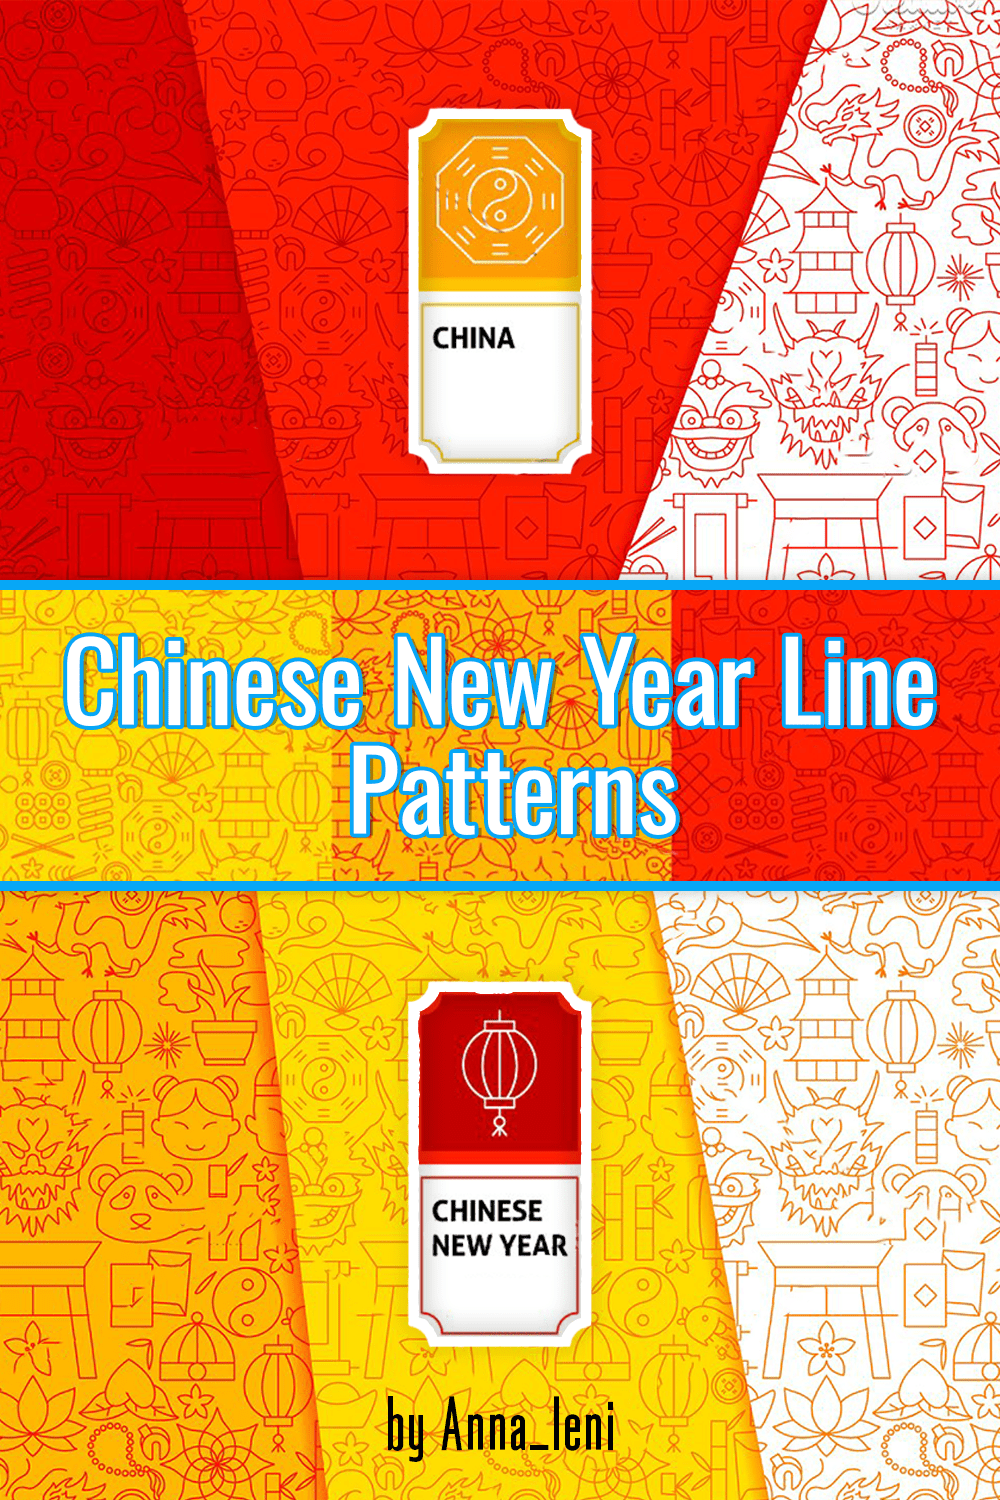 chinese new year line patterns pinterest